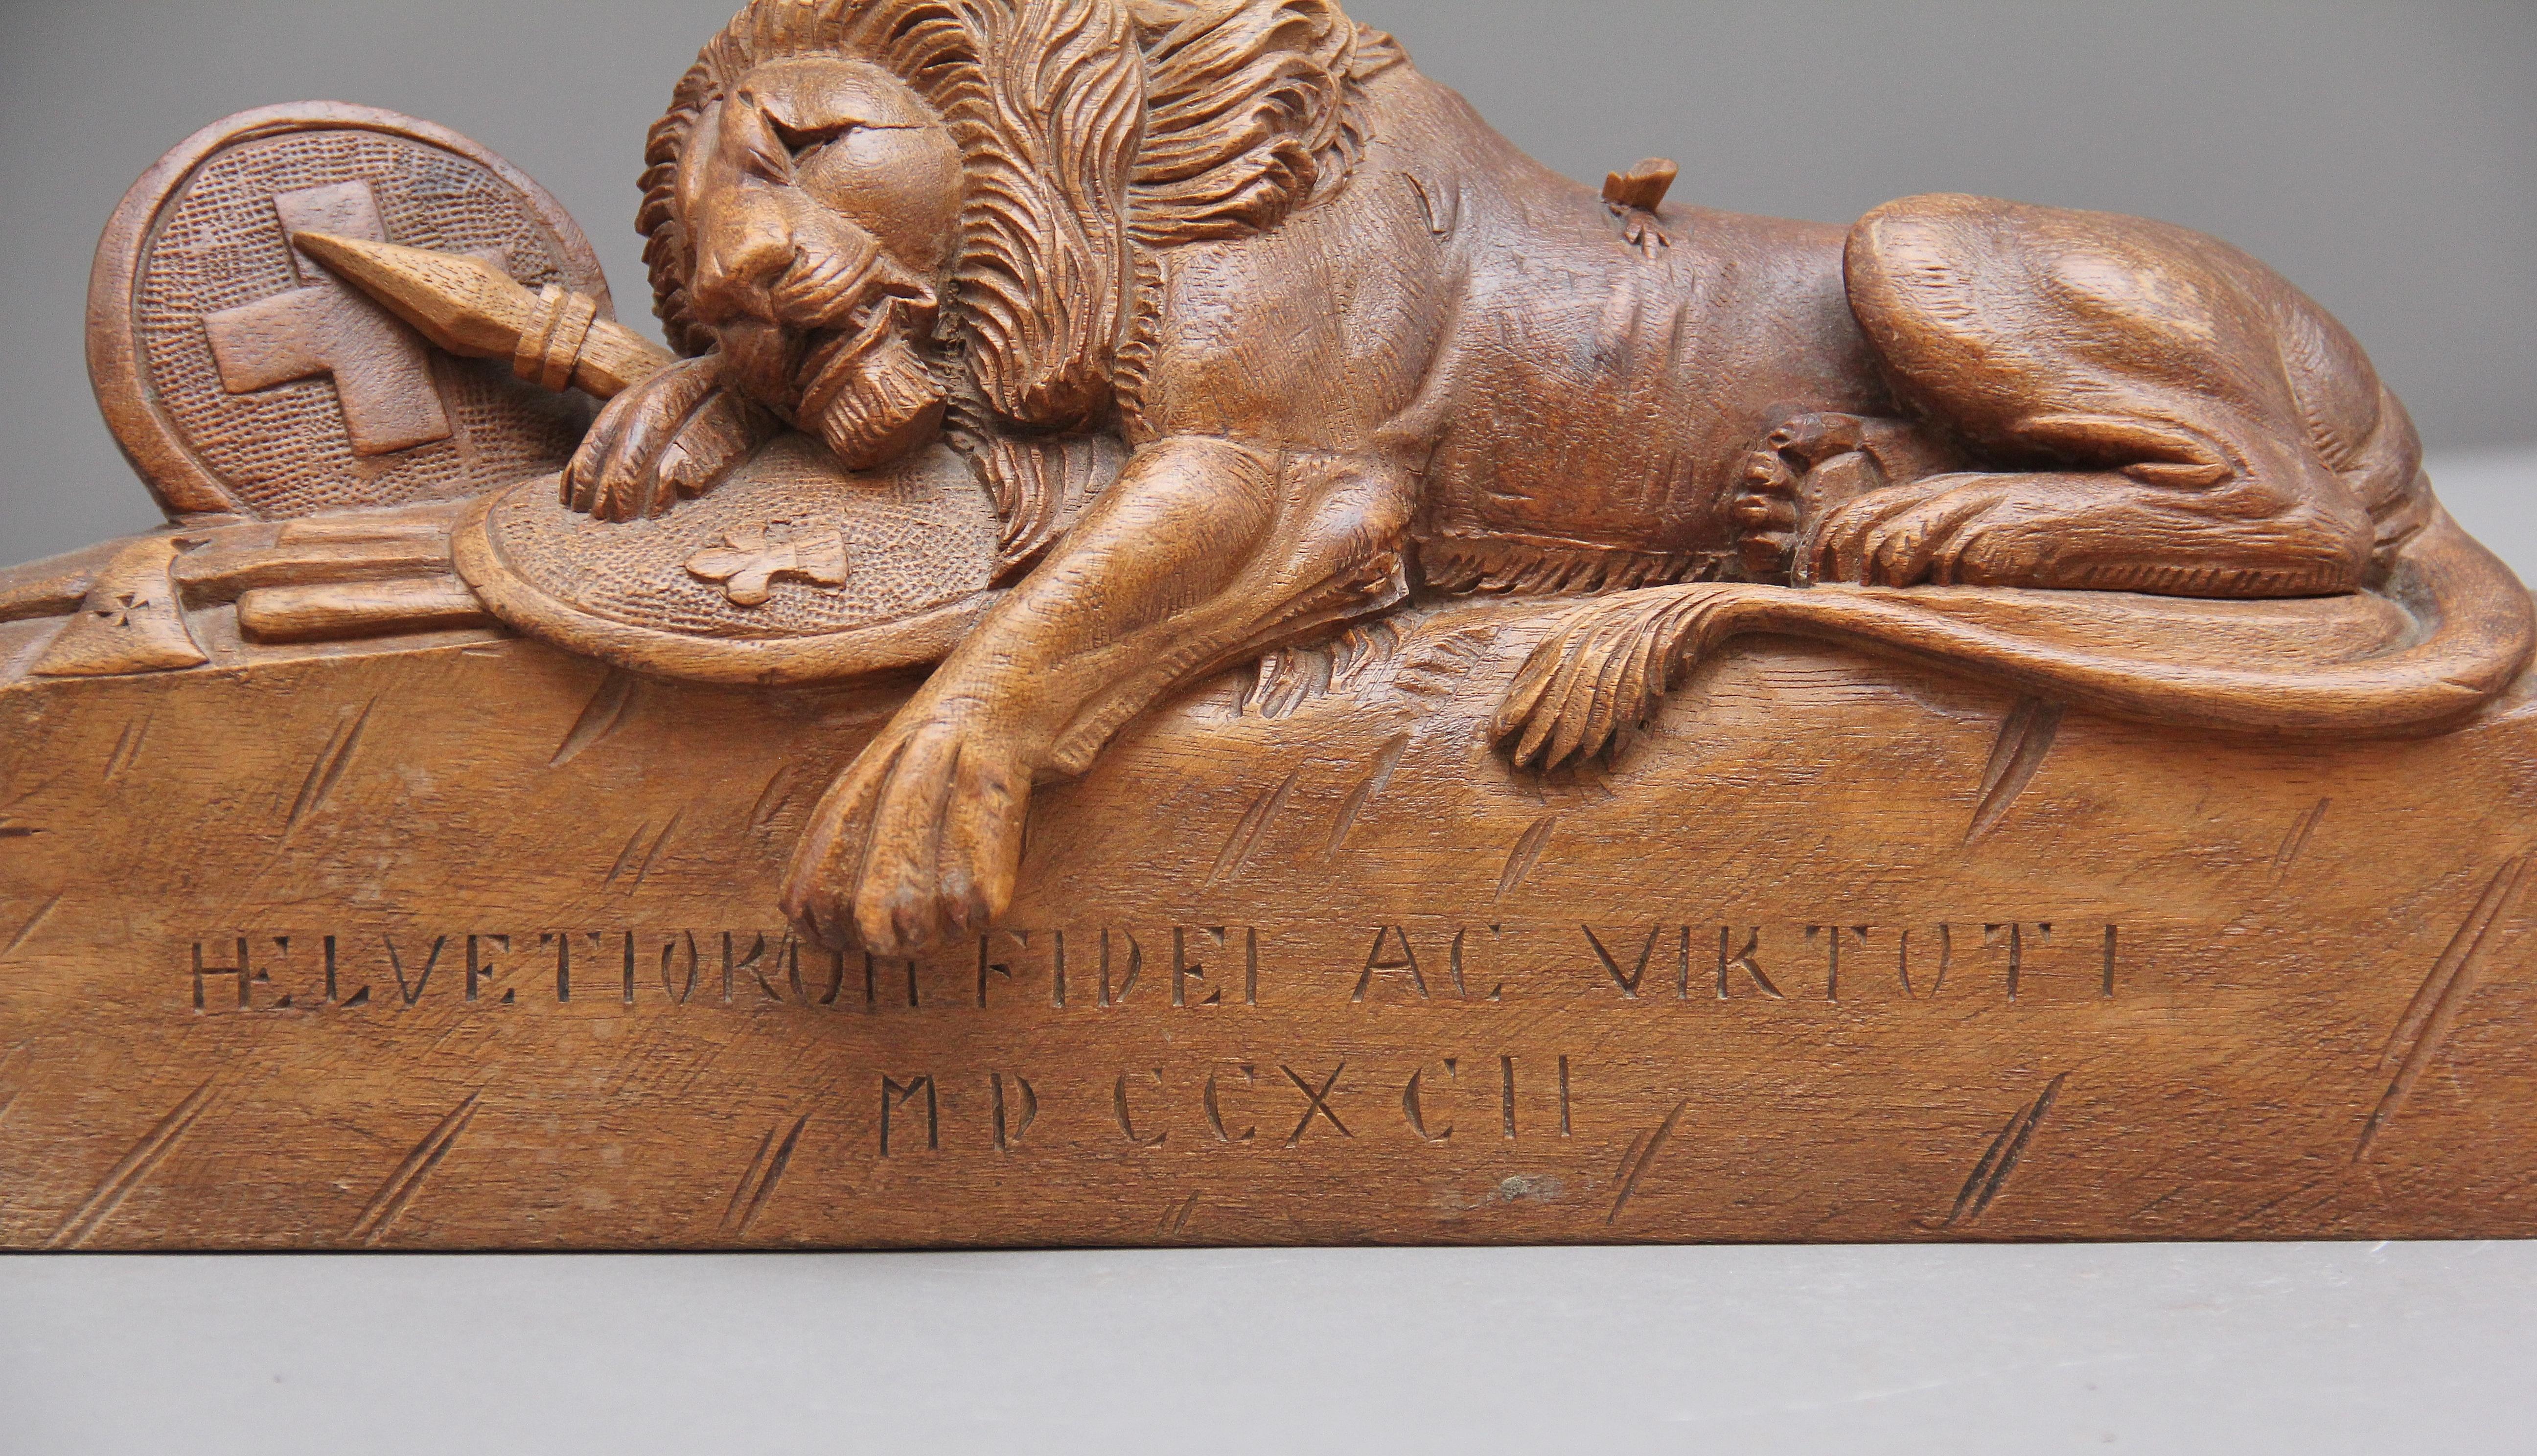 19th century Black Forest walnut carving of the lion of Lucerne resting upon armor and weapons. Lovely quality and crisp carving, circa 1880.

The Lion Monument, or the Lion of Lucerne, is a rock relief in Lucerne, Switzerland, designed by Bertel